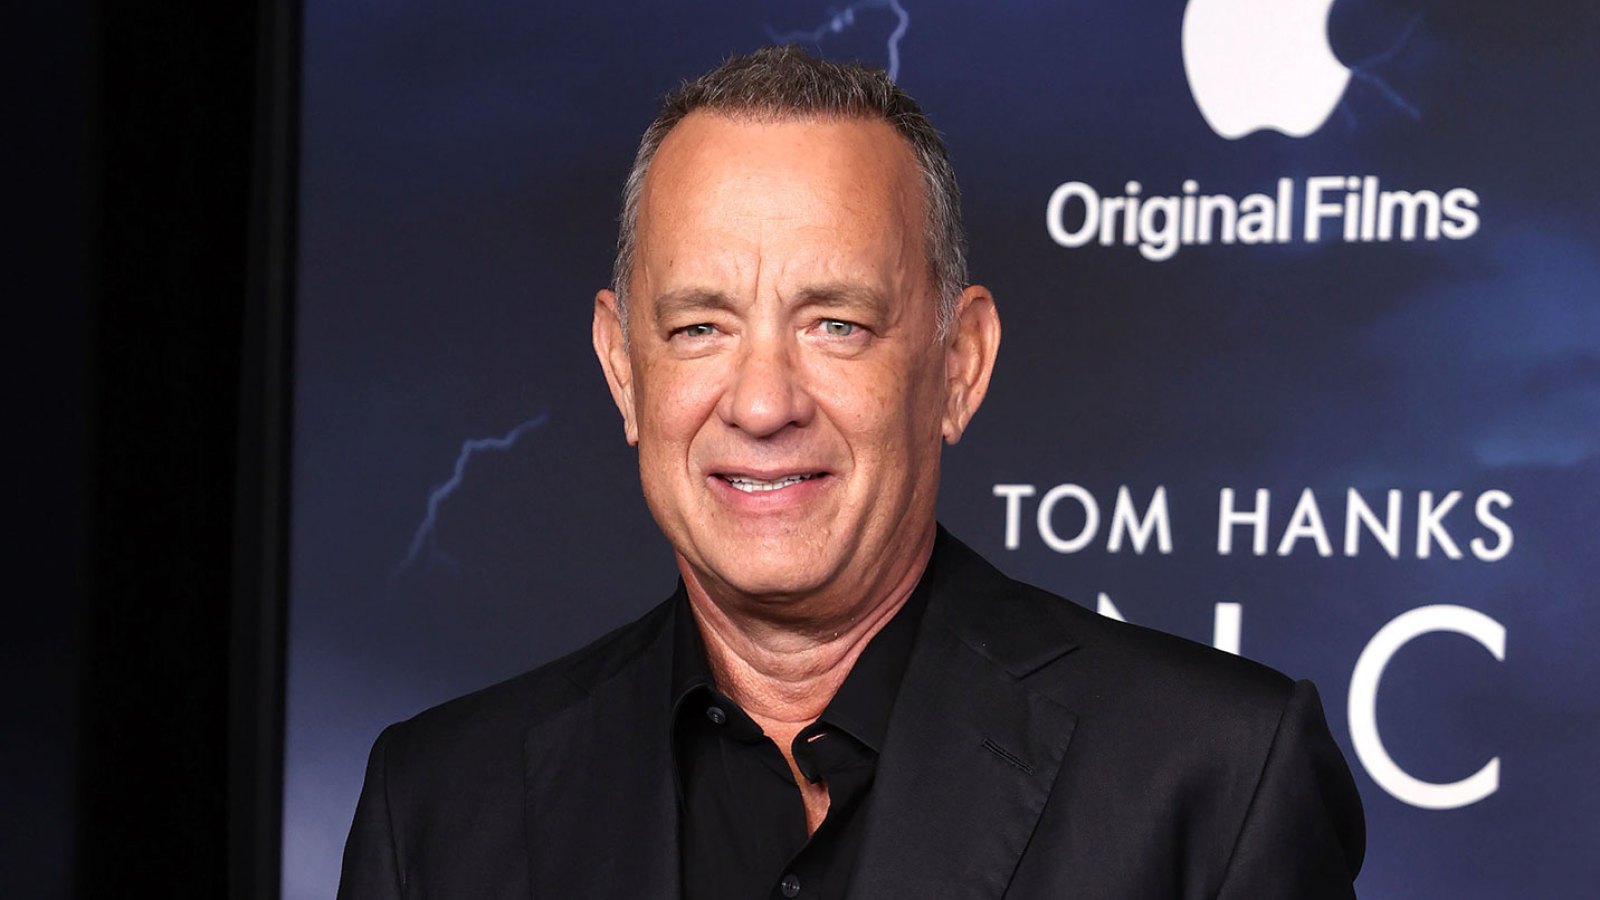 Tom Hanks Explains Why He Wouldn't Take Another Gay Role